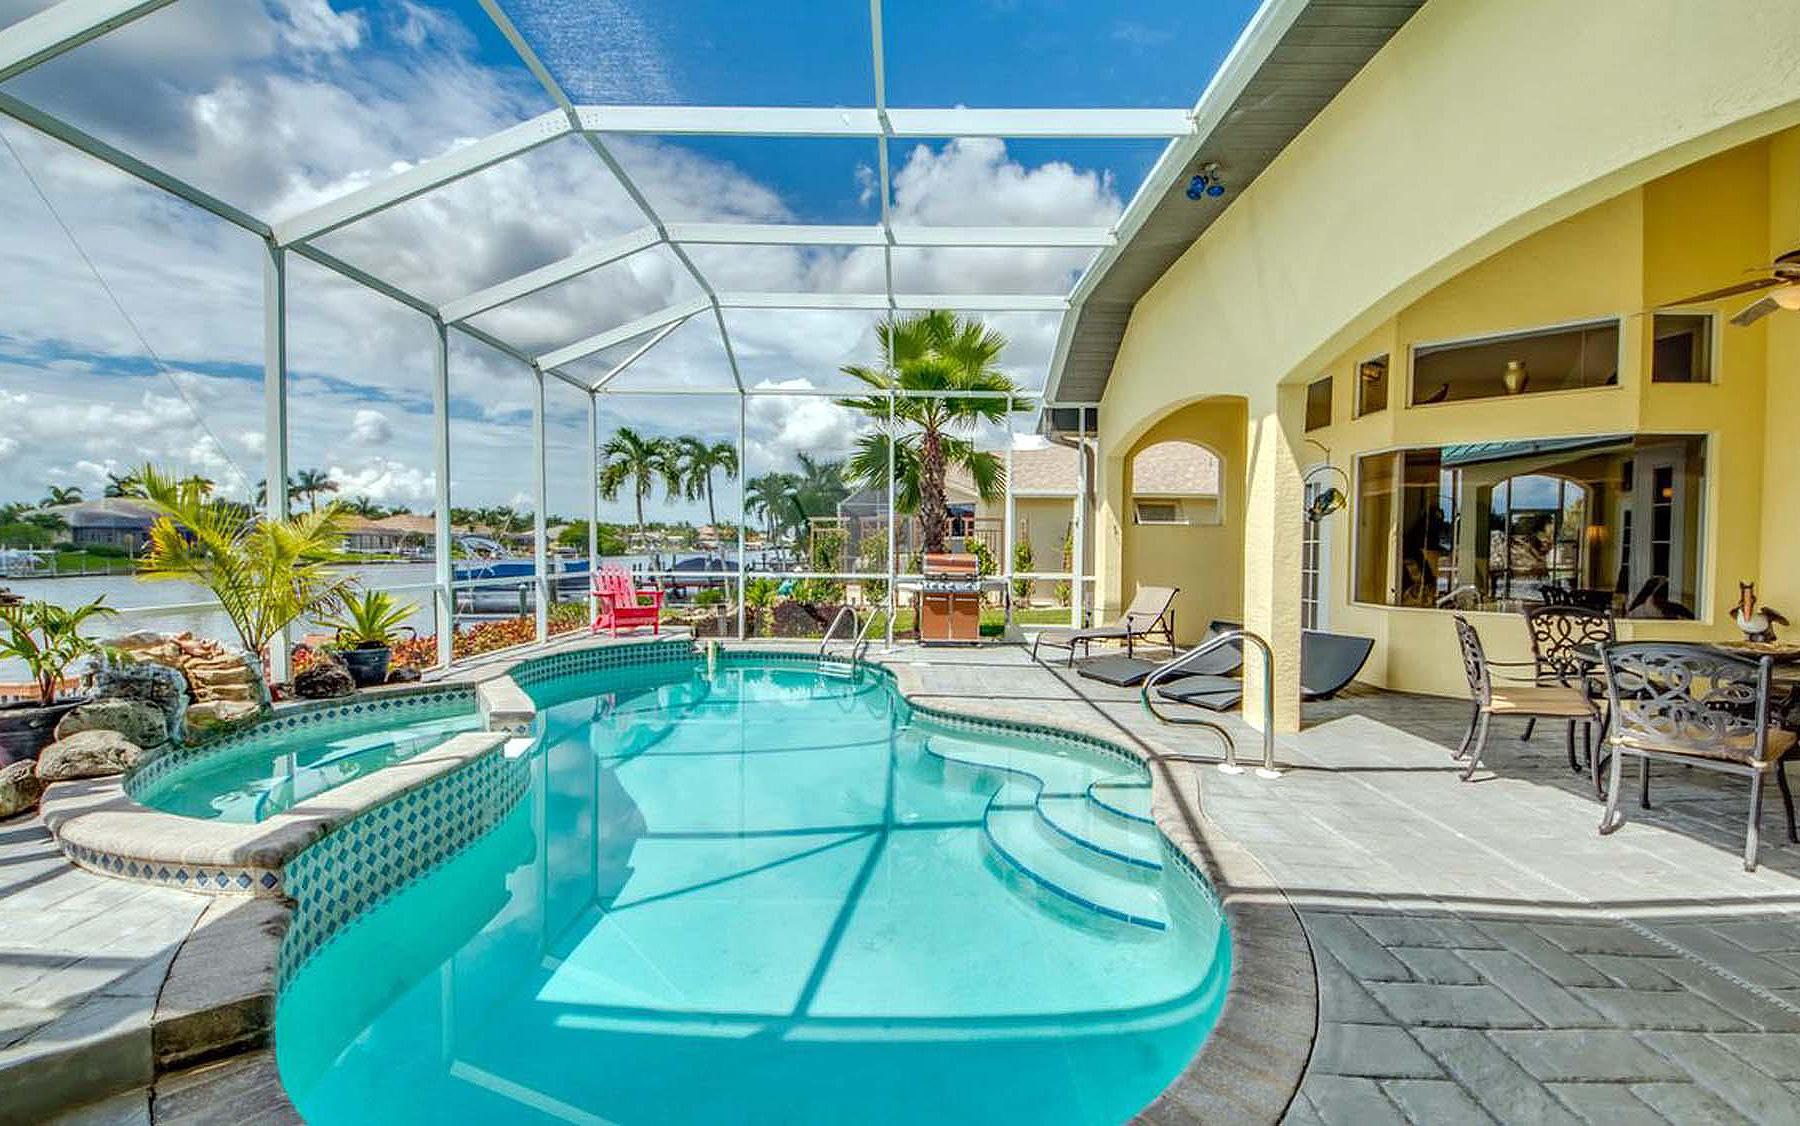 Haus 41 - Coral Bay - Cape Coral Rental Houses